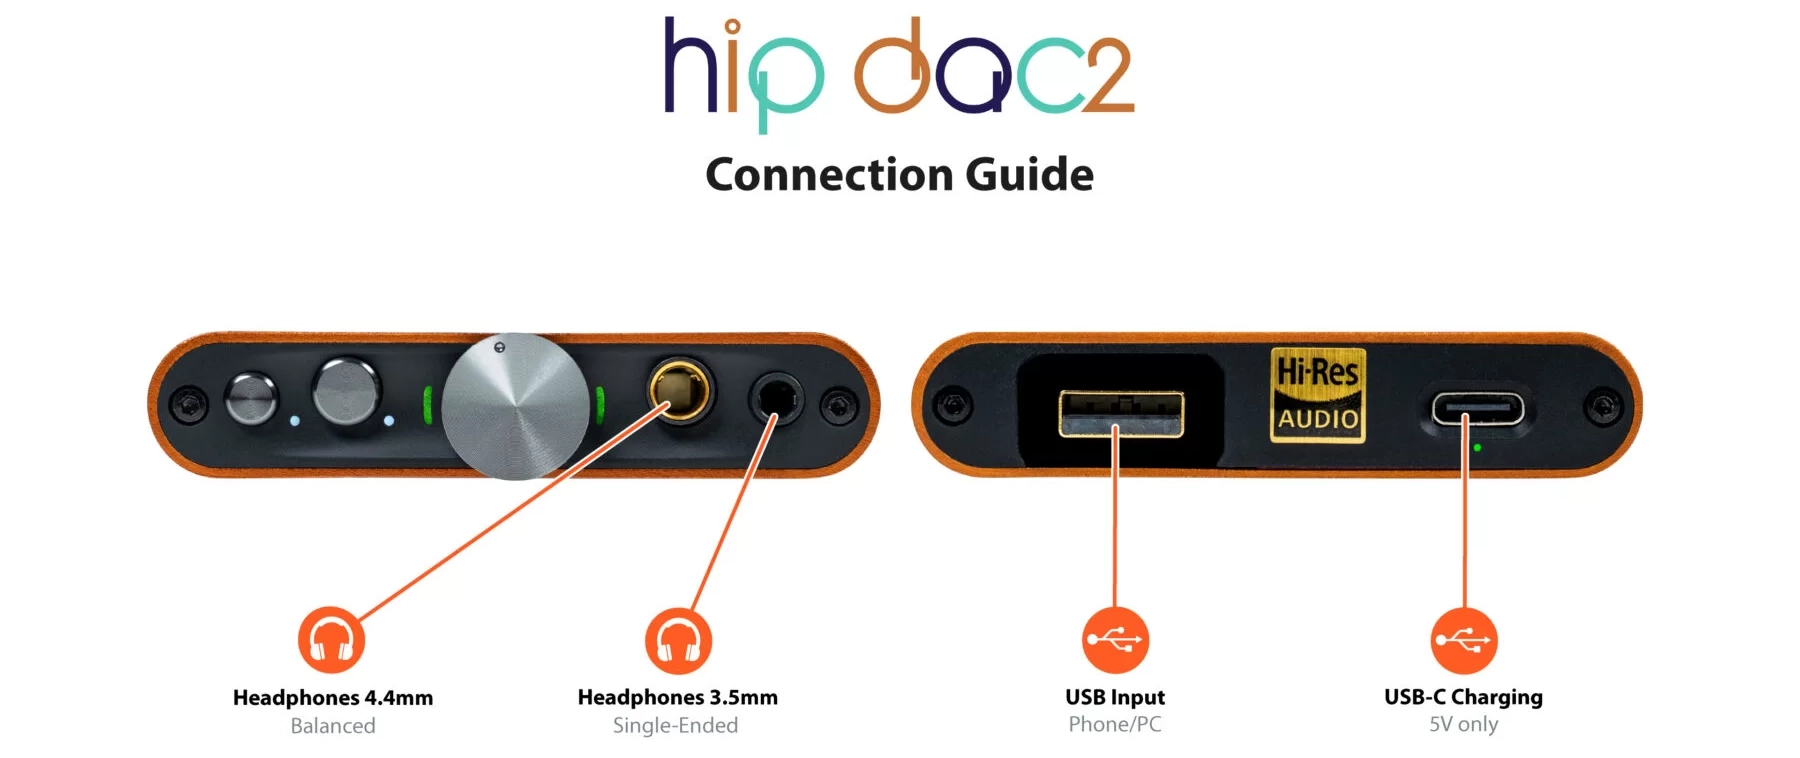 iFi hip dac 2 Connection Guide